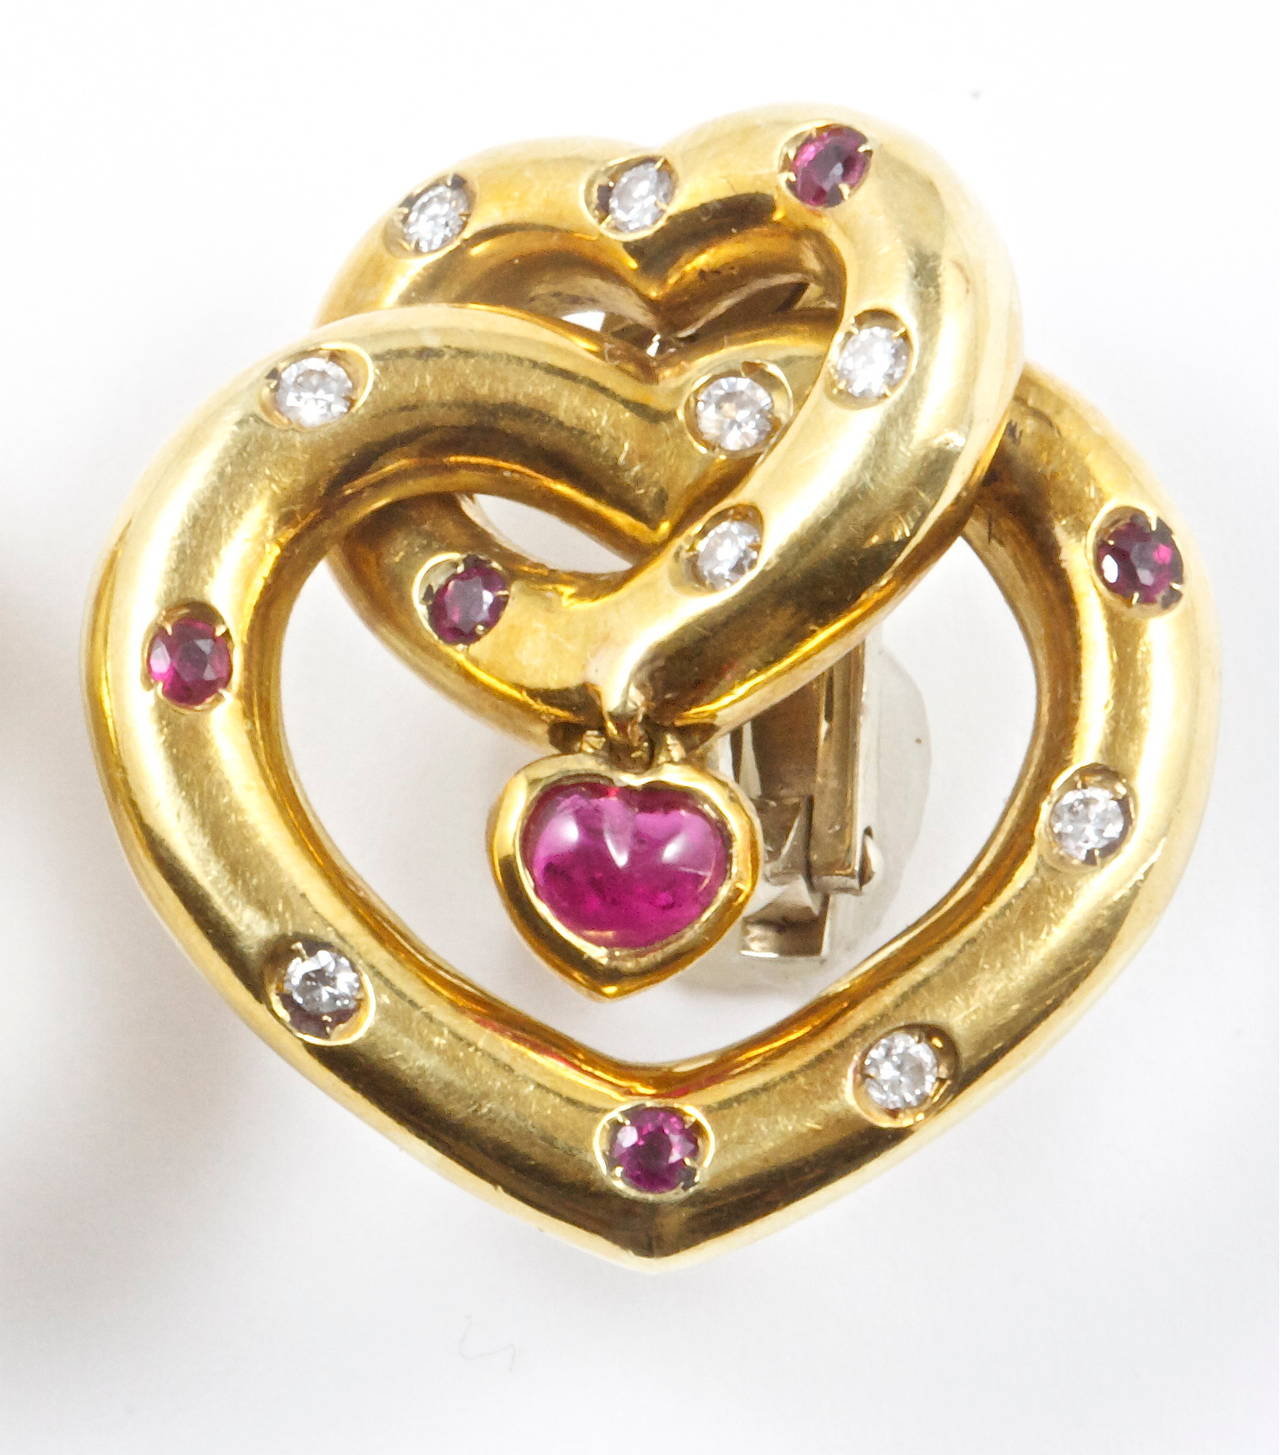 Intertwining hearts expressing love and bonding. In 18k gold with rubies and diamonds.